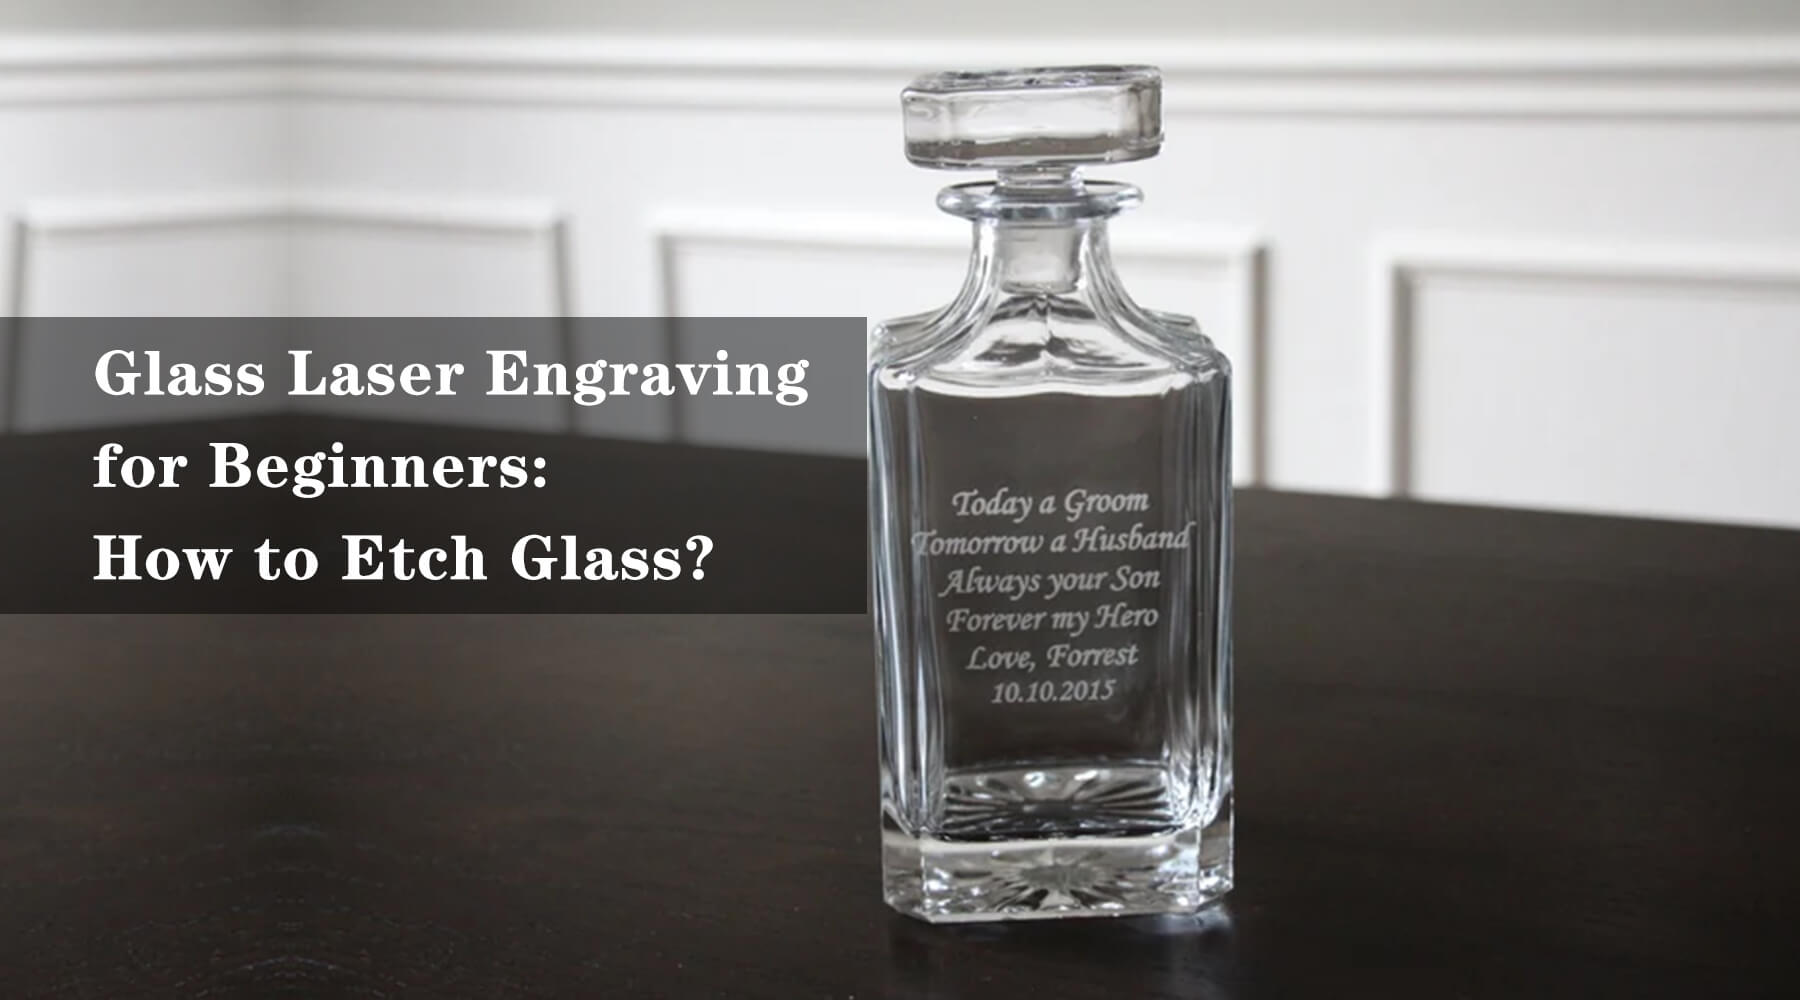 Glass Laser Engraving for beginners: How to etch glass